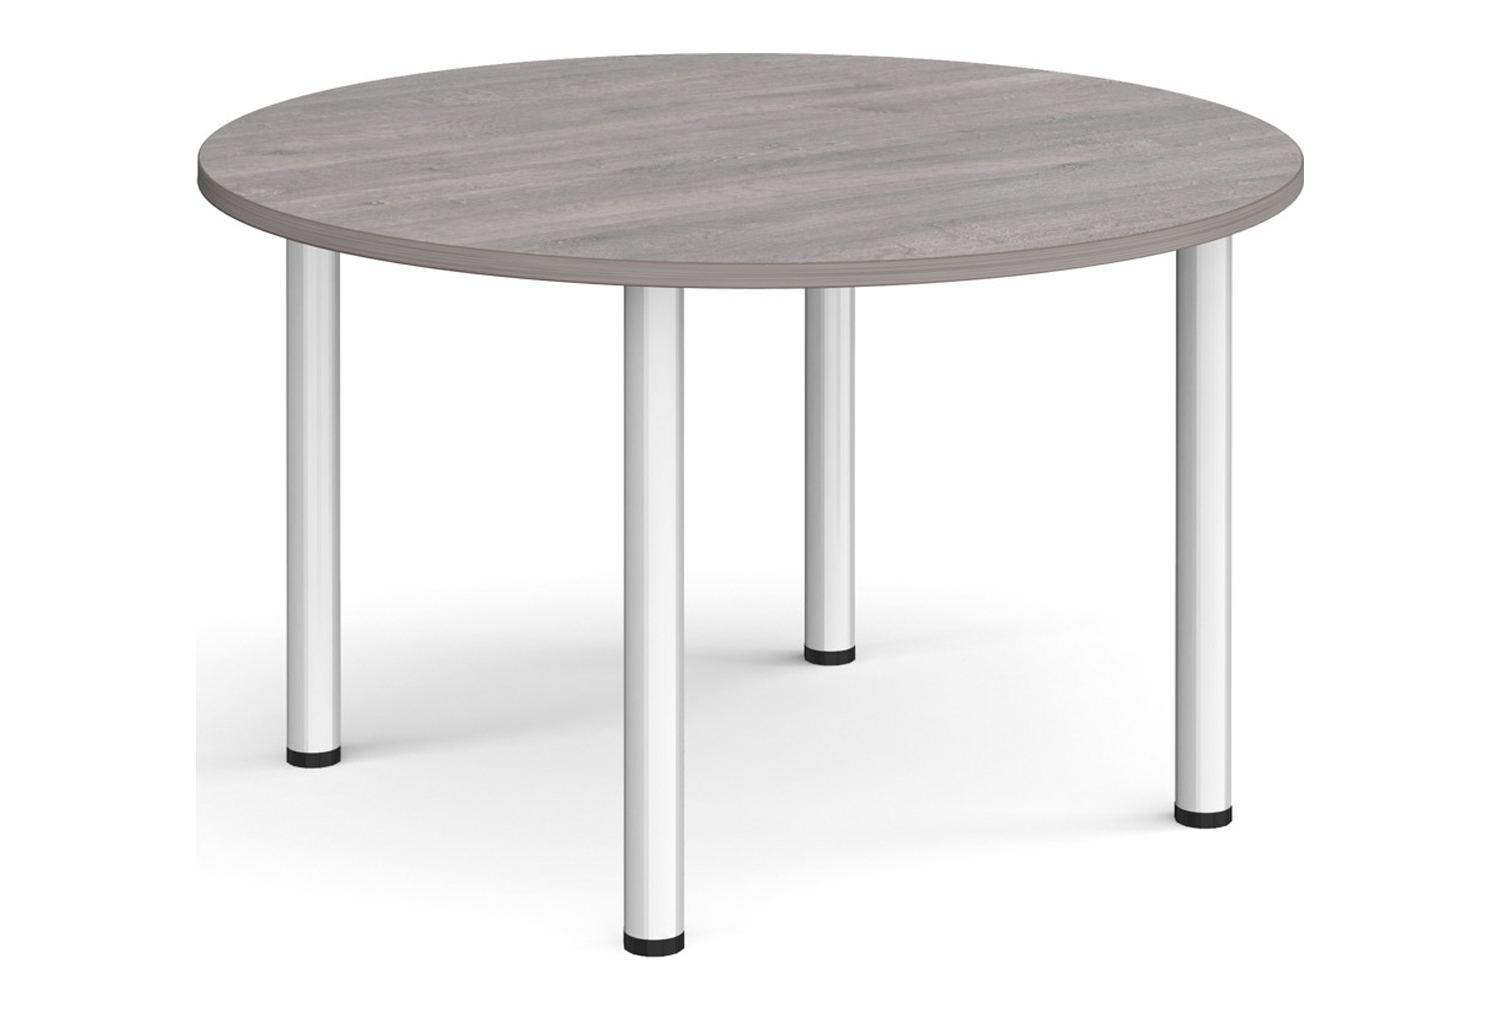 Bowers Round Meeting Table, 120diax73h (cm), Grey Oak, Express Delivery